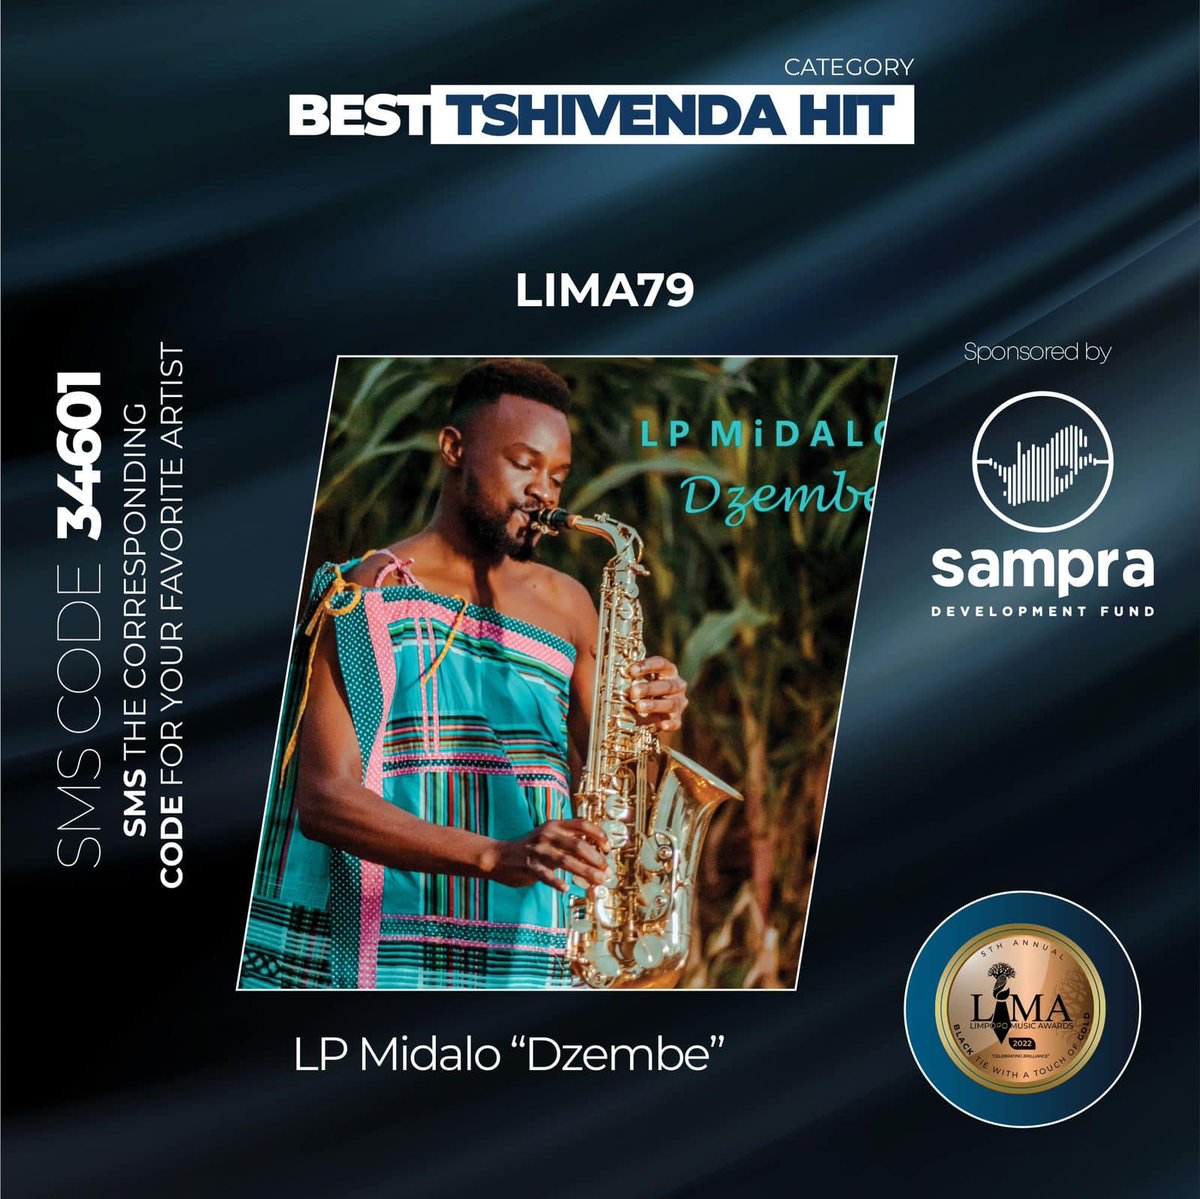 Director Maboko on X: Both @Lp_midalo and @BurningFireSA are nominated for TSHIVENFA  HIT at @TheLIMAs_ Sms LIMA79 to 34601 LP MiDALO #Dzembe #BestTshivendaHit  Sms LIMA77 to 34601 Burning Fire #Mukonisi #BestTshivendaHit   /